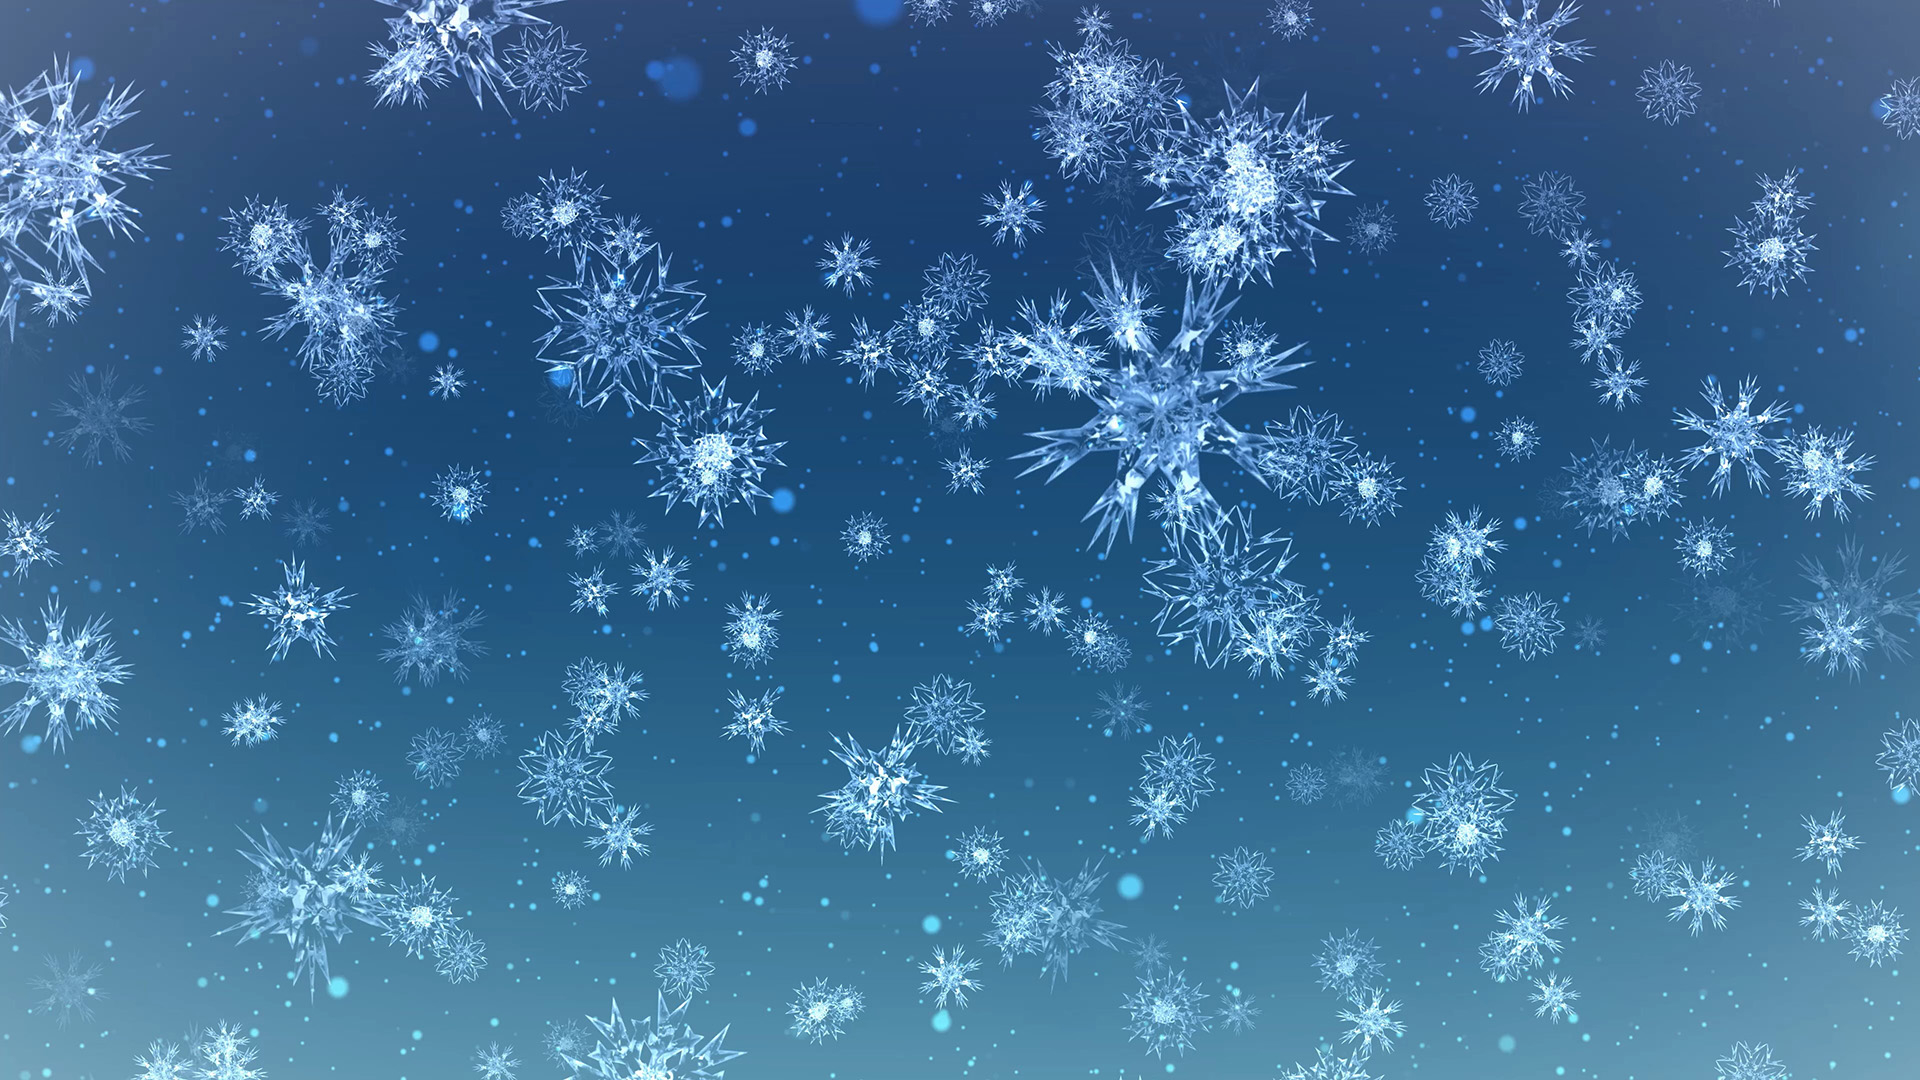 1920x1080 Snowflakes Falling Motion Live Wallpapers